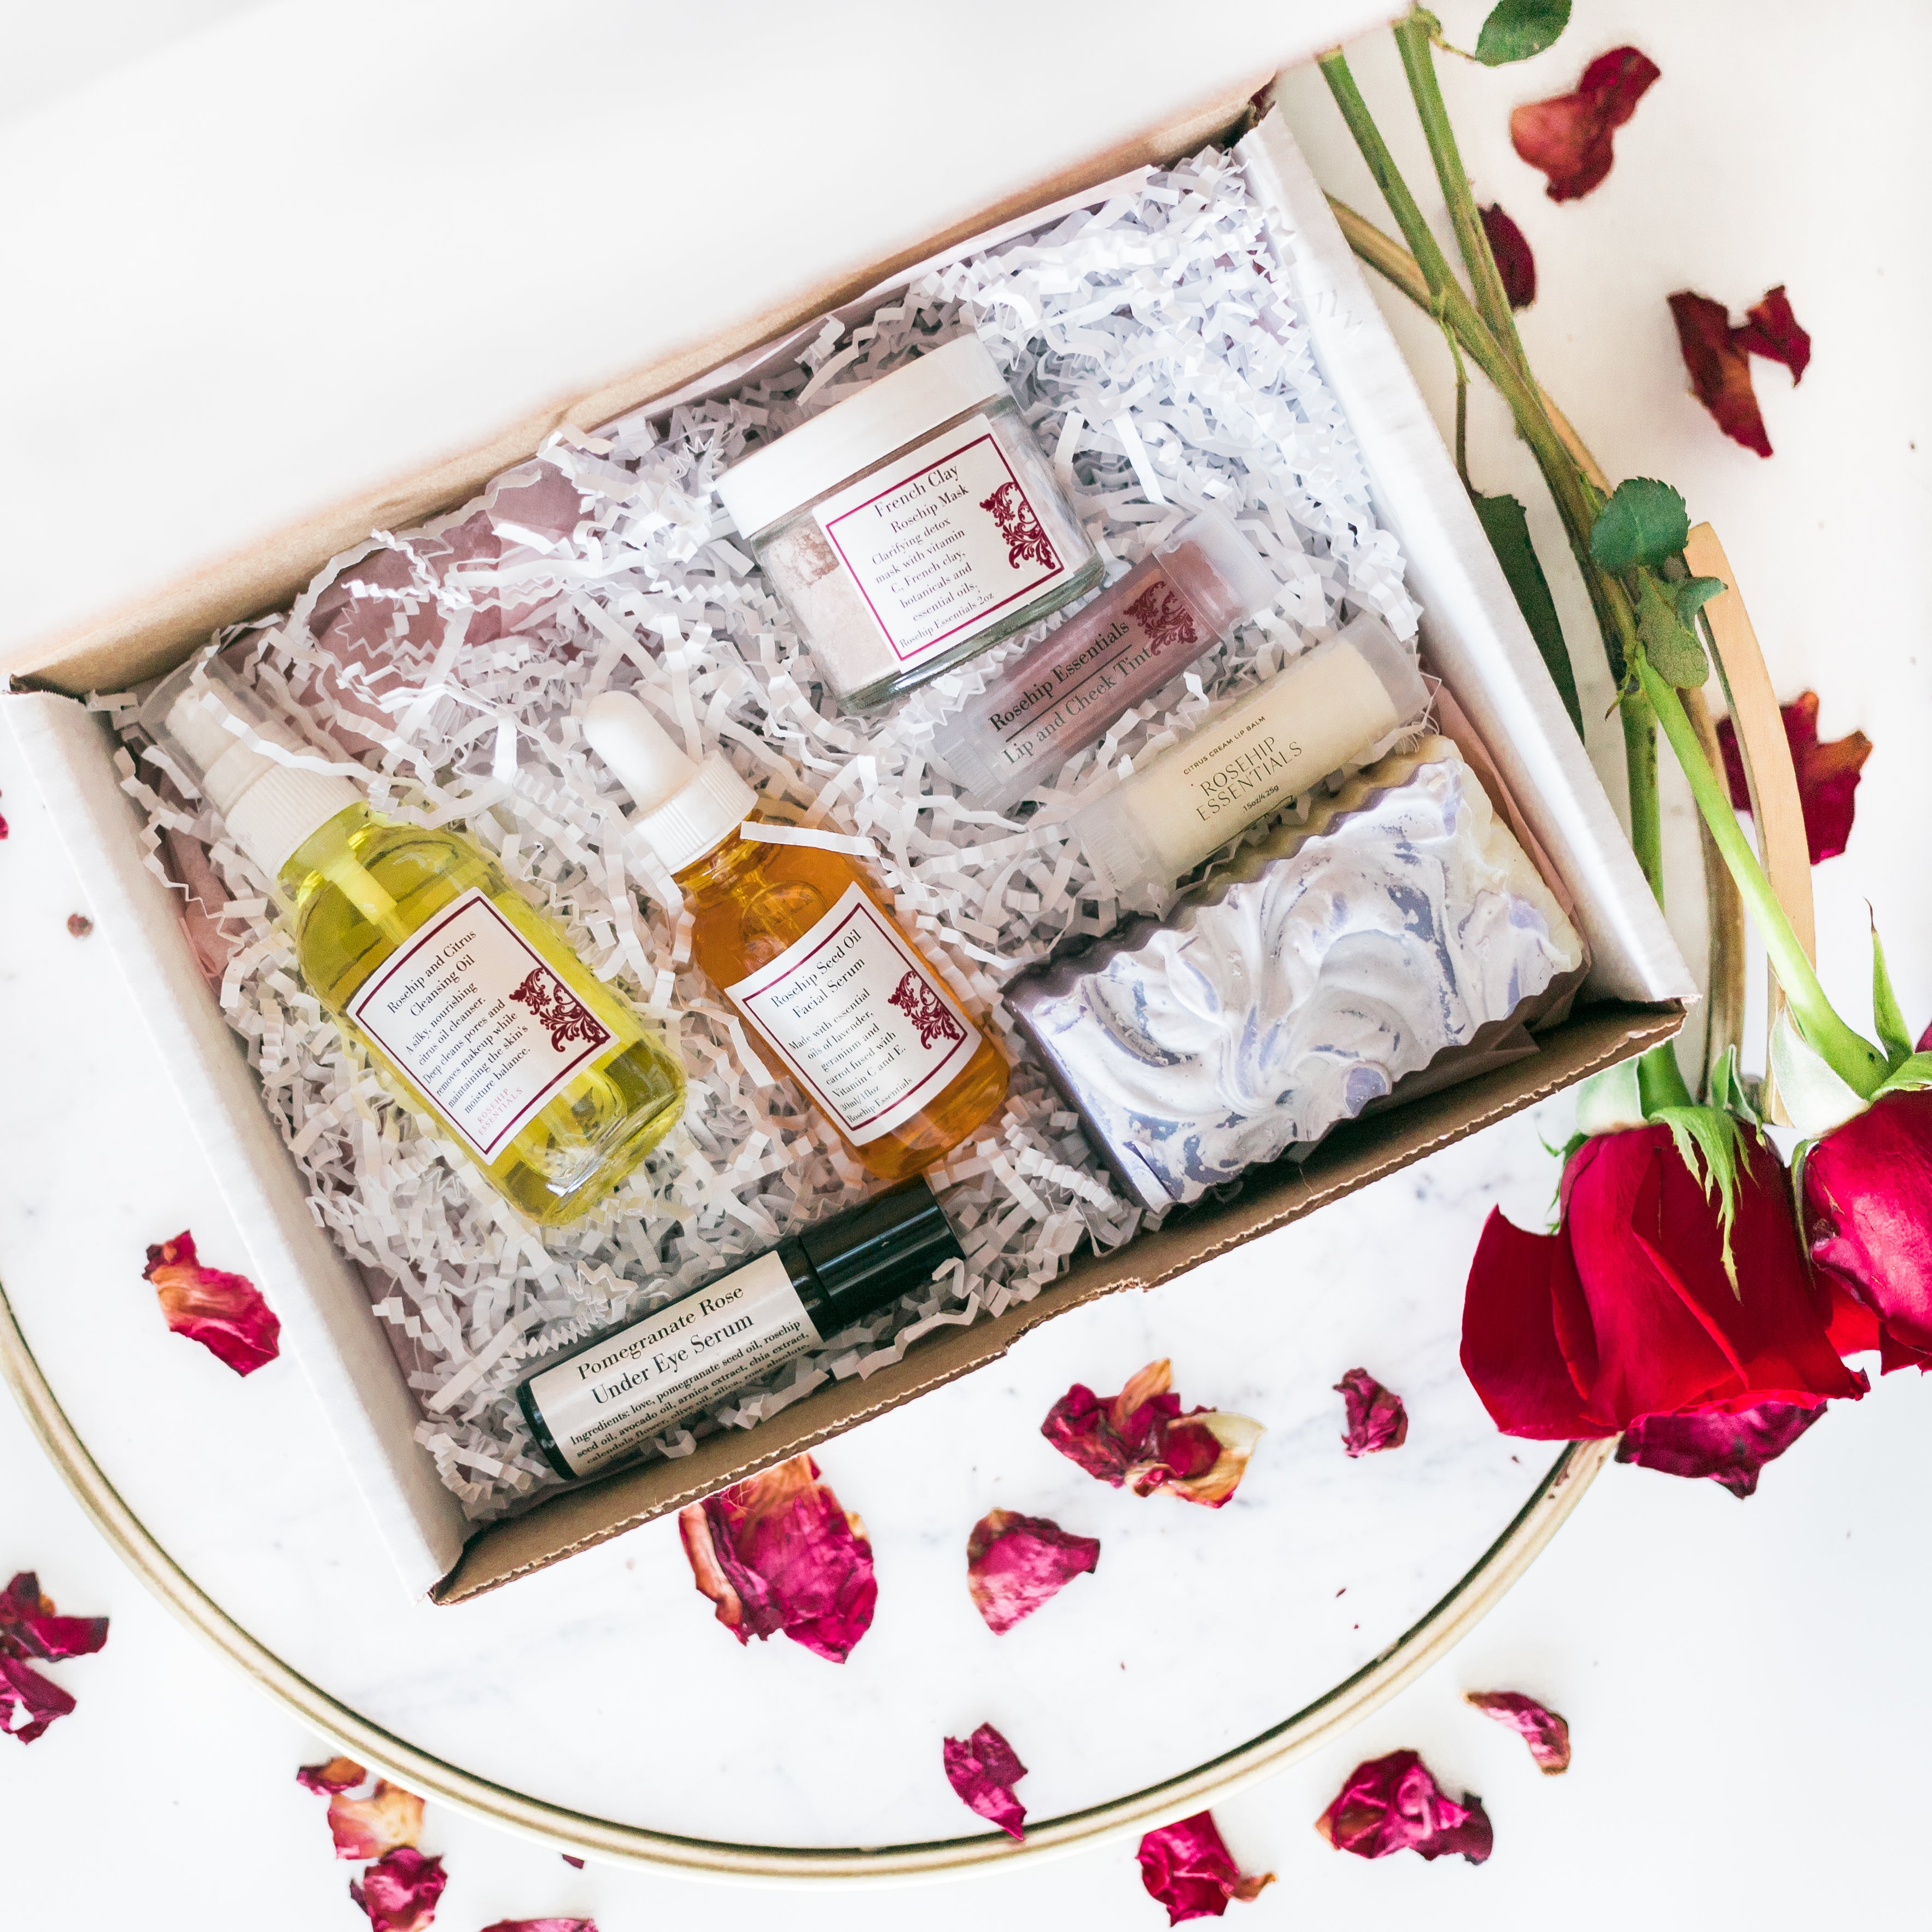 Rose Collection Gift Set